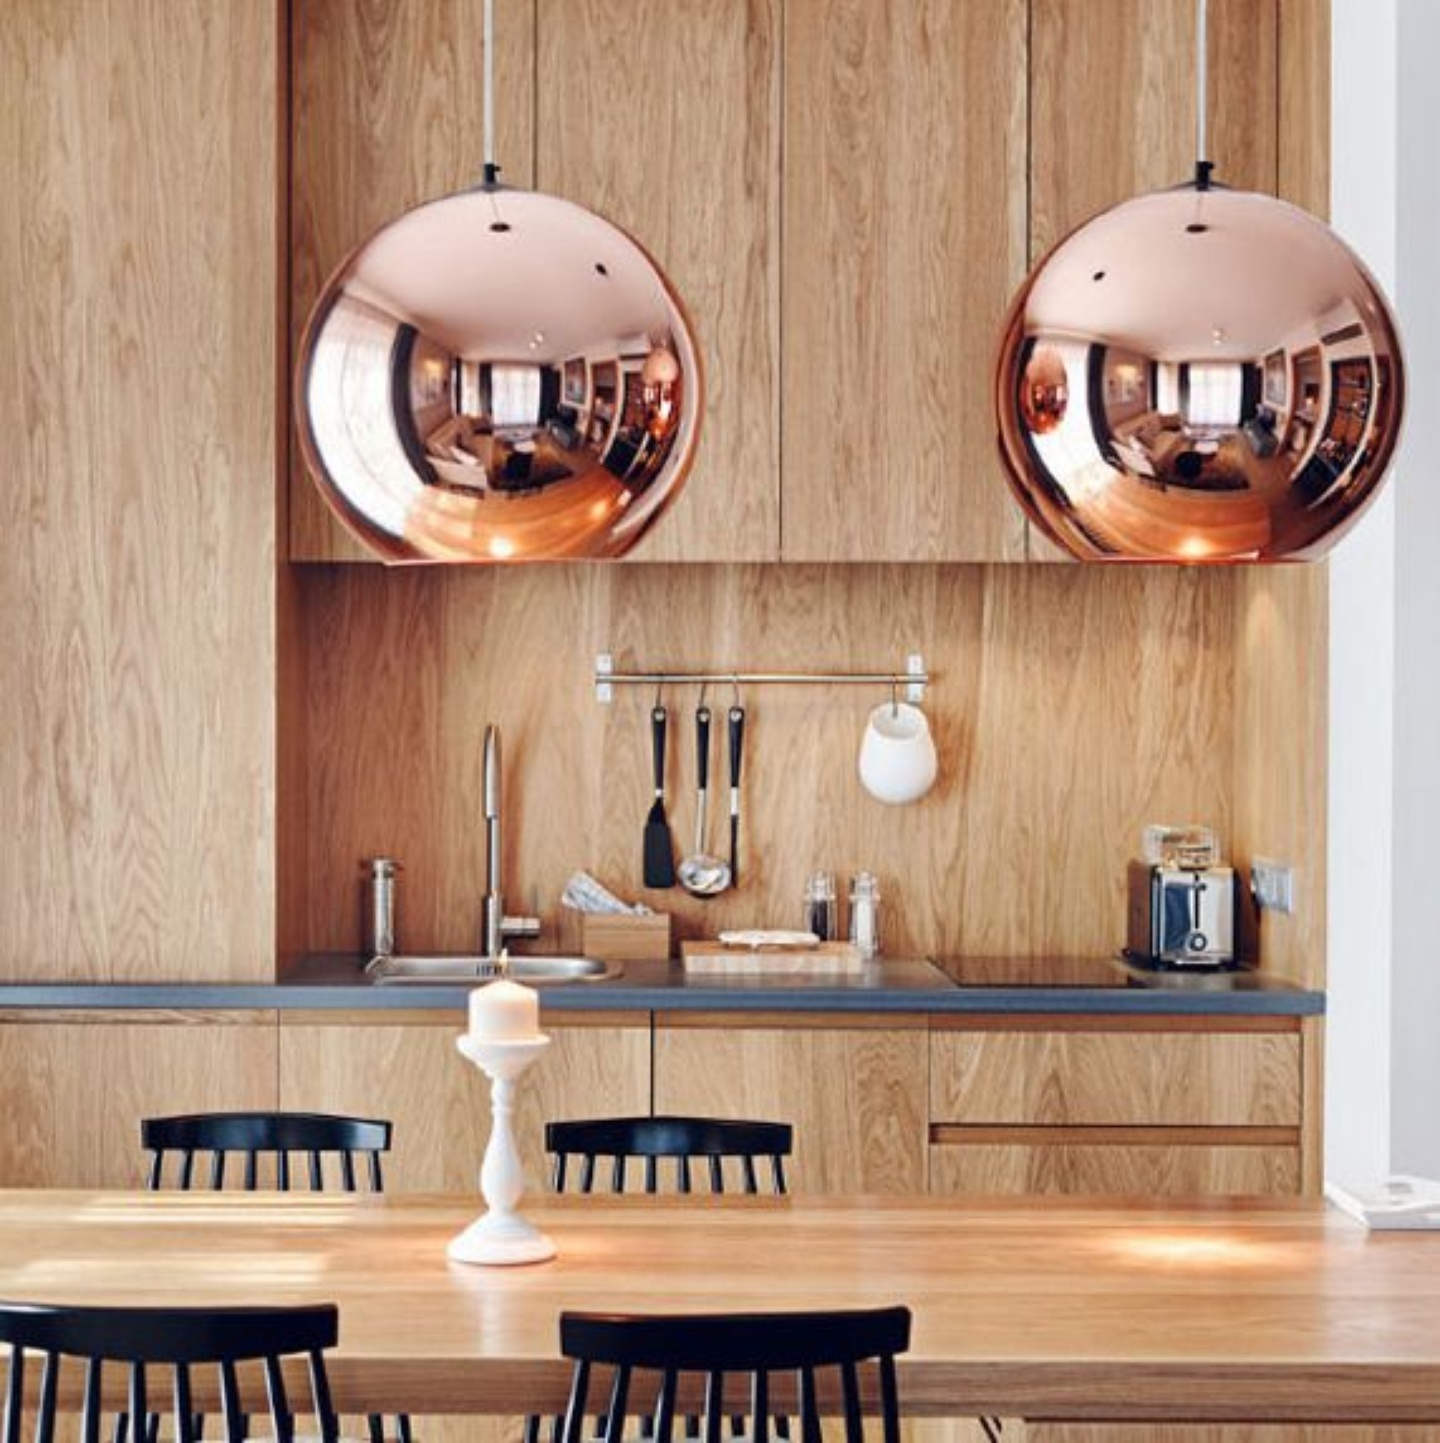 Tom Dixon's copper pendant light x 2 (but that's still only 1 item ticked off)